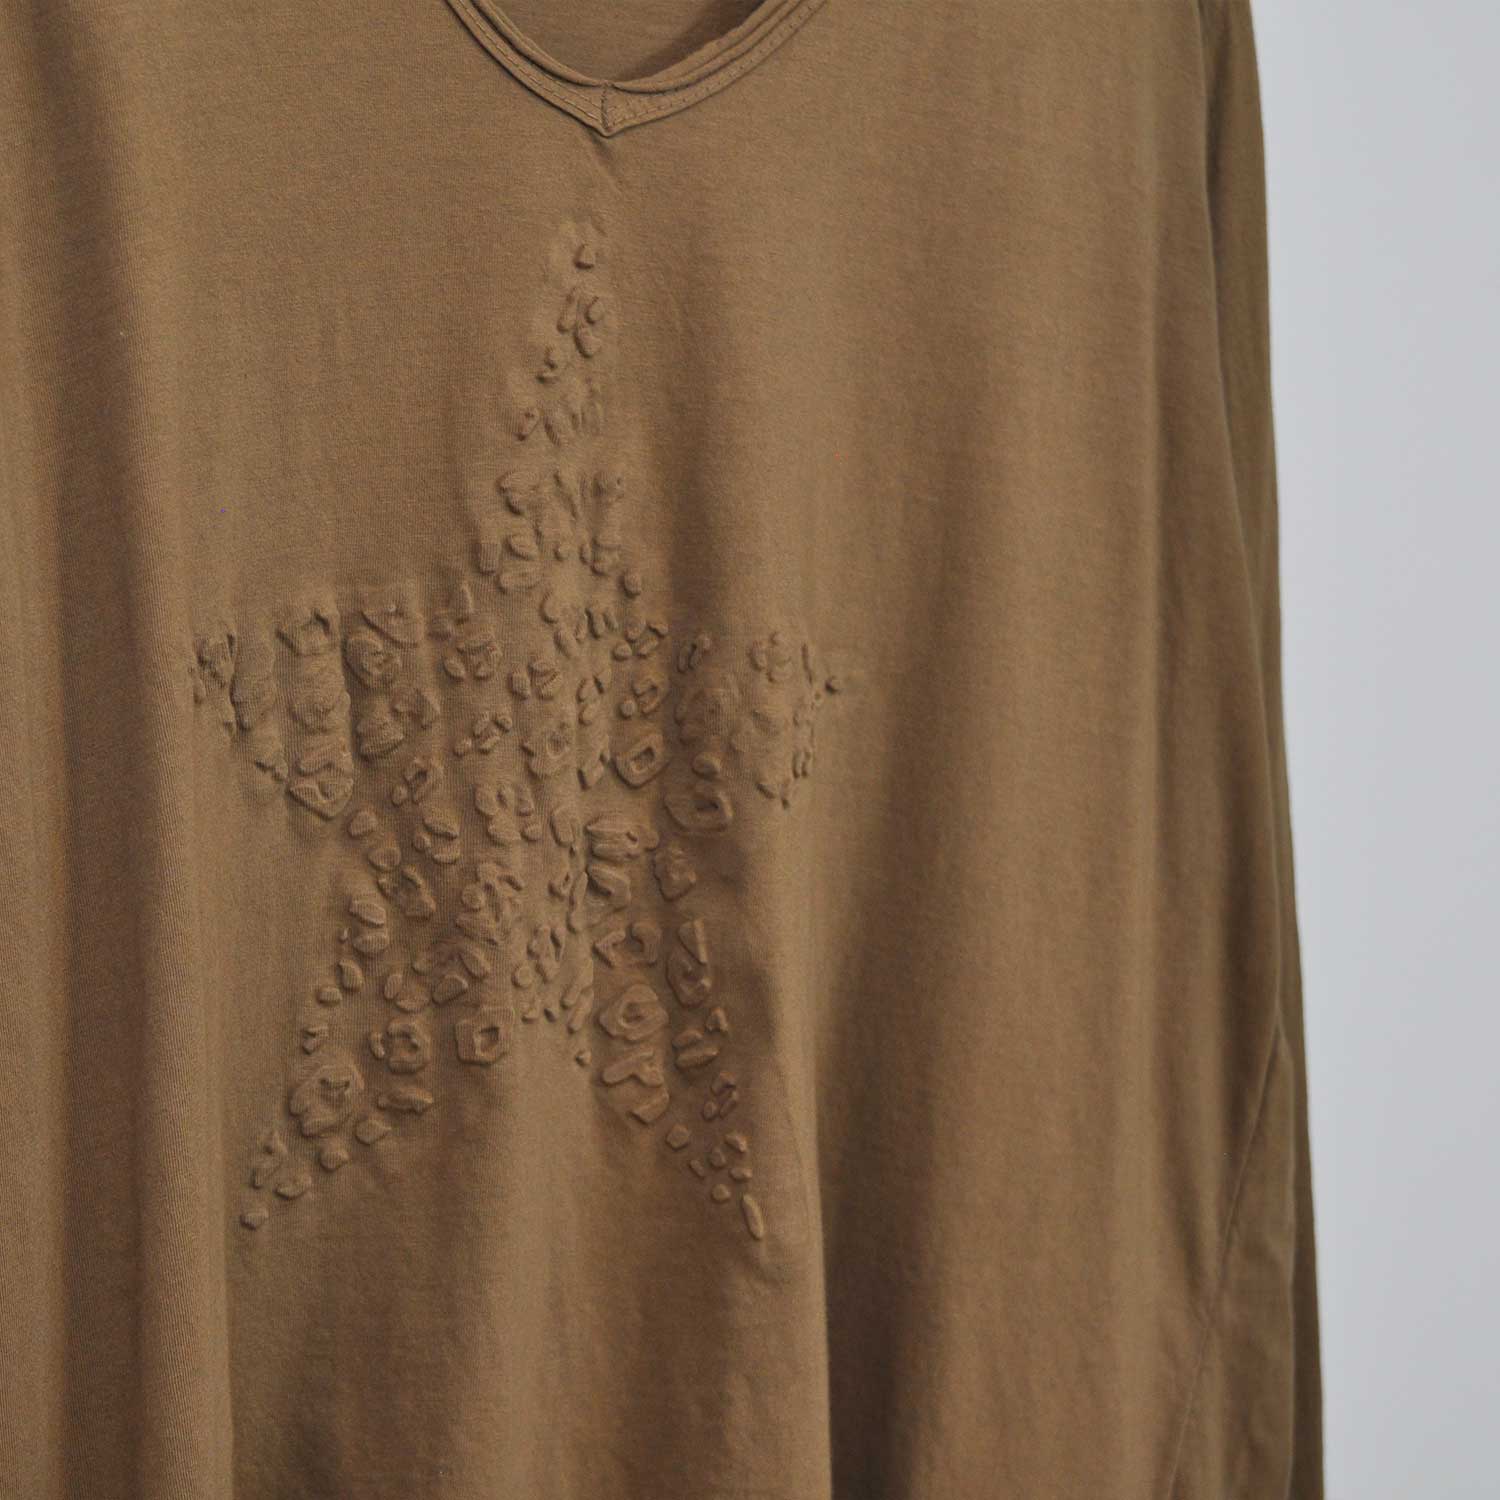 Brown stars relief t-shirt